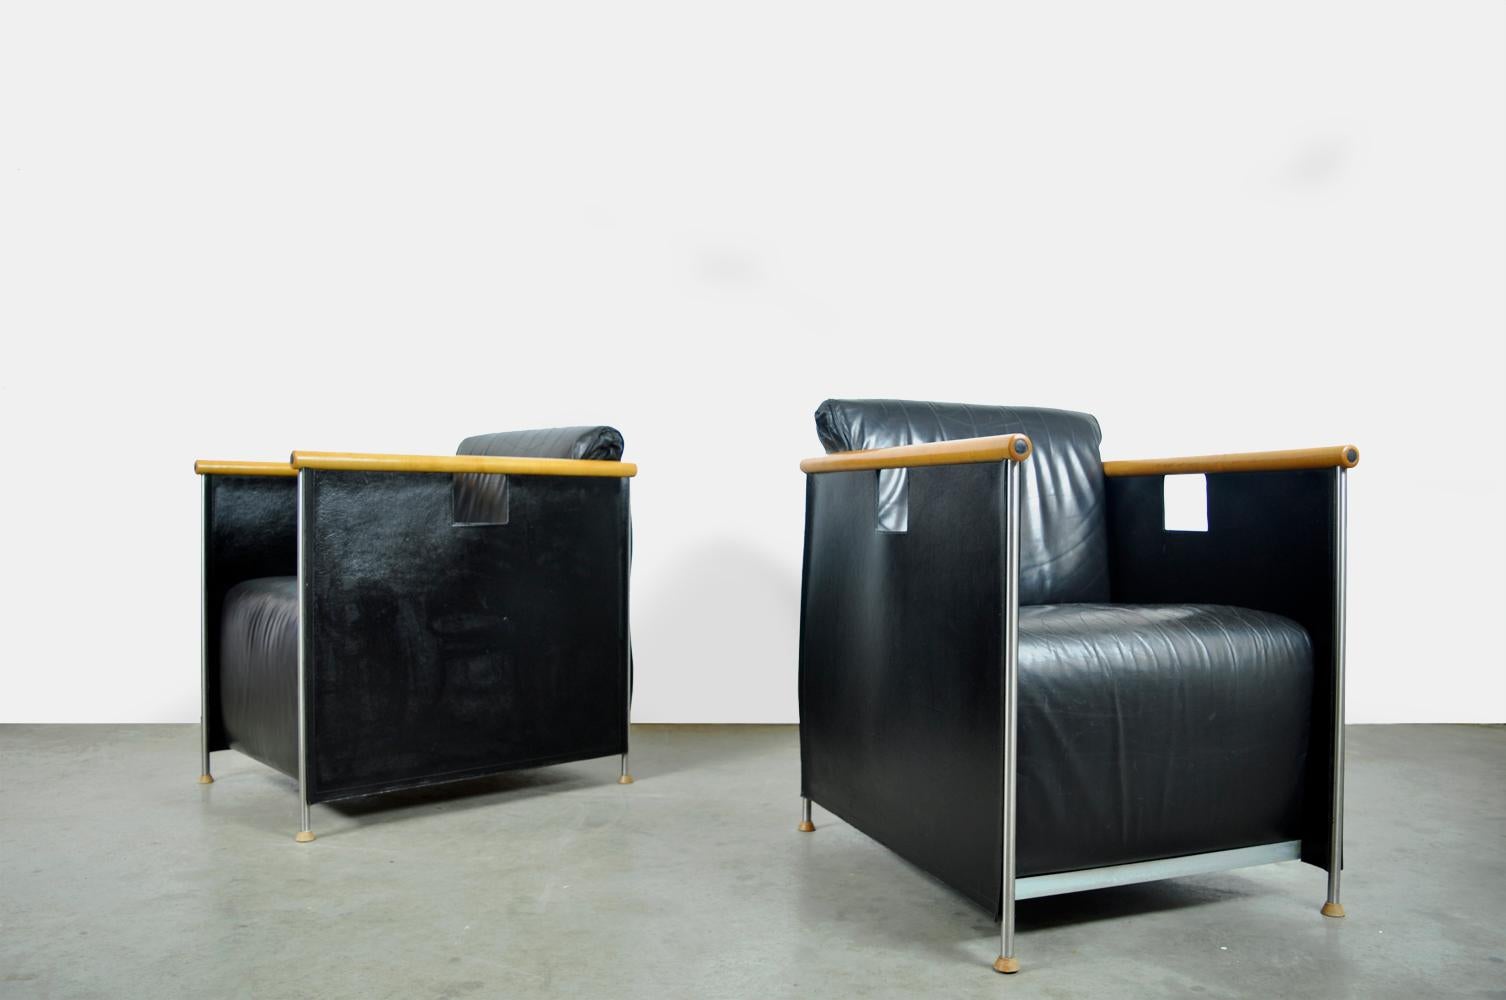 Leather armchairs designed by the duo Mazairac & boonzaaijer and produced in the 1980s by Castelijn, the Netherlands.
Modern 1980s armchairs with black leather cushions, beech armrests, slender metal legs with wooden feet and black leather